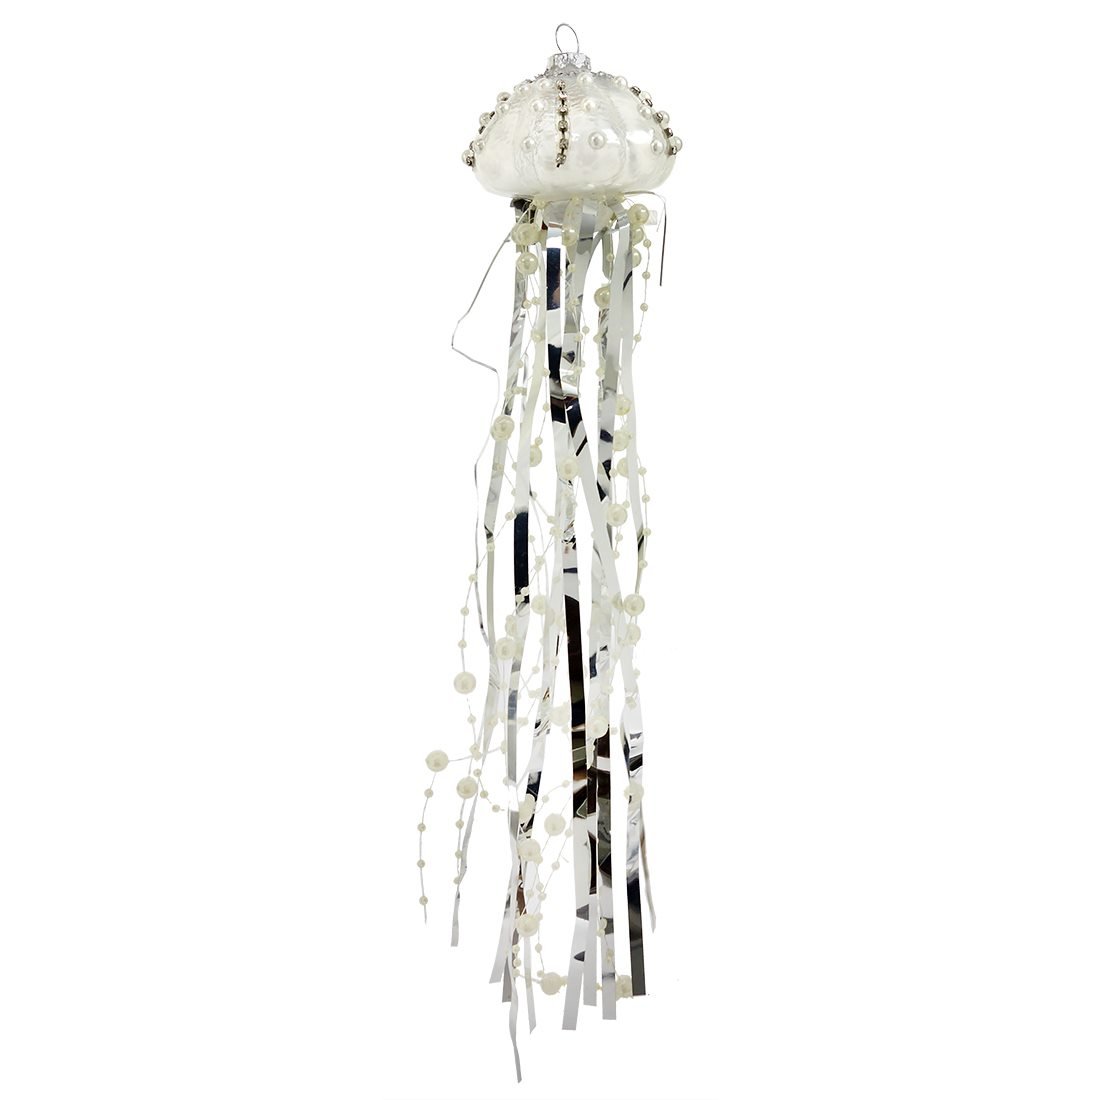 Silver & White Jellyfish With Long Tentacles Ornament